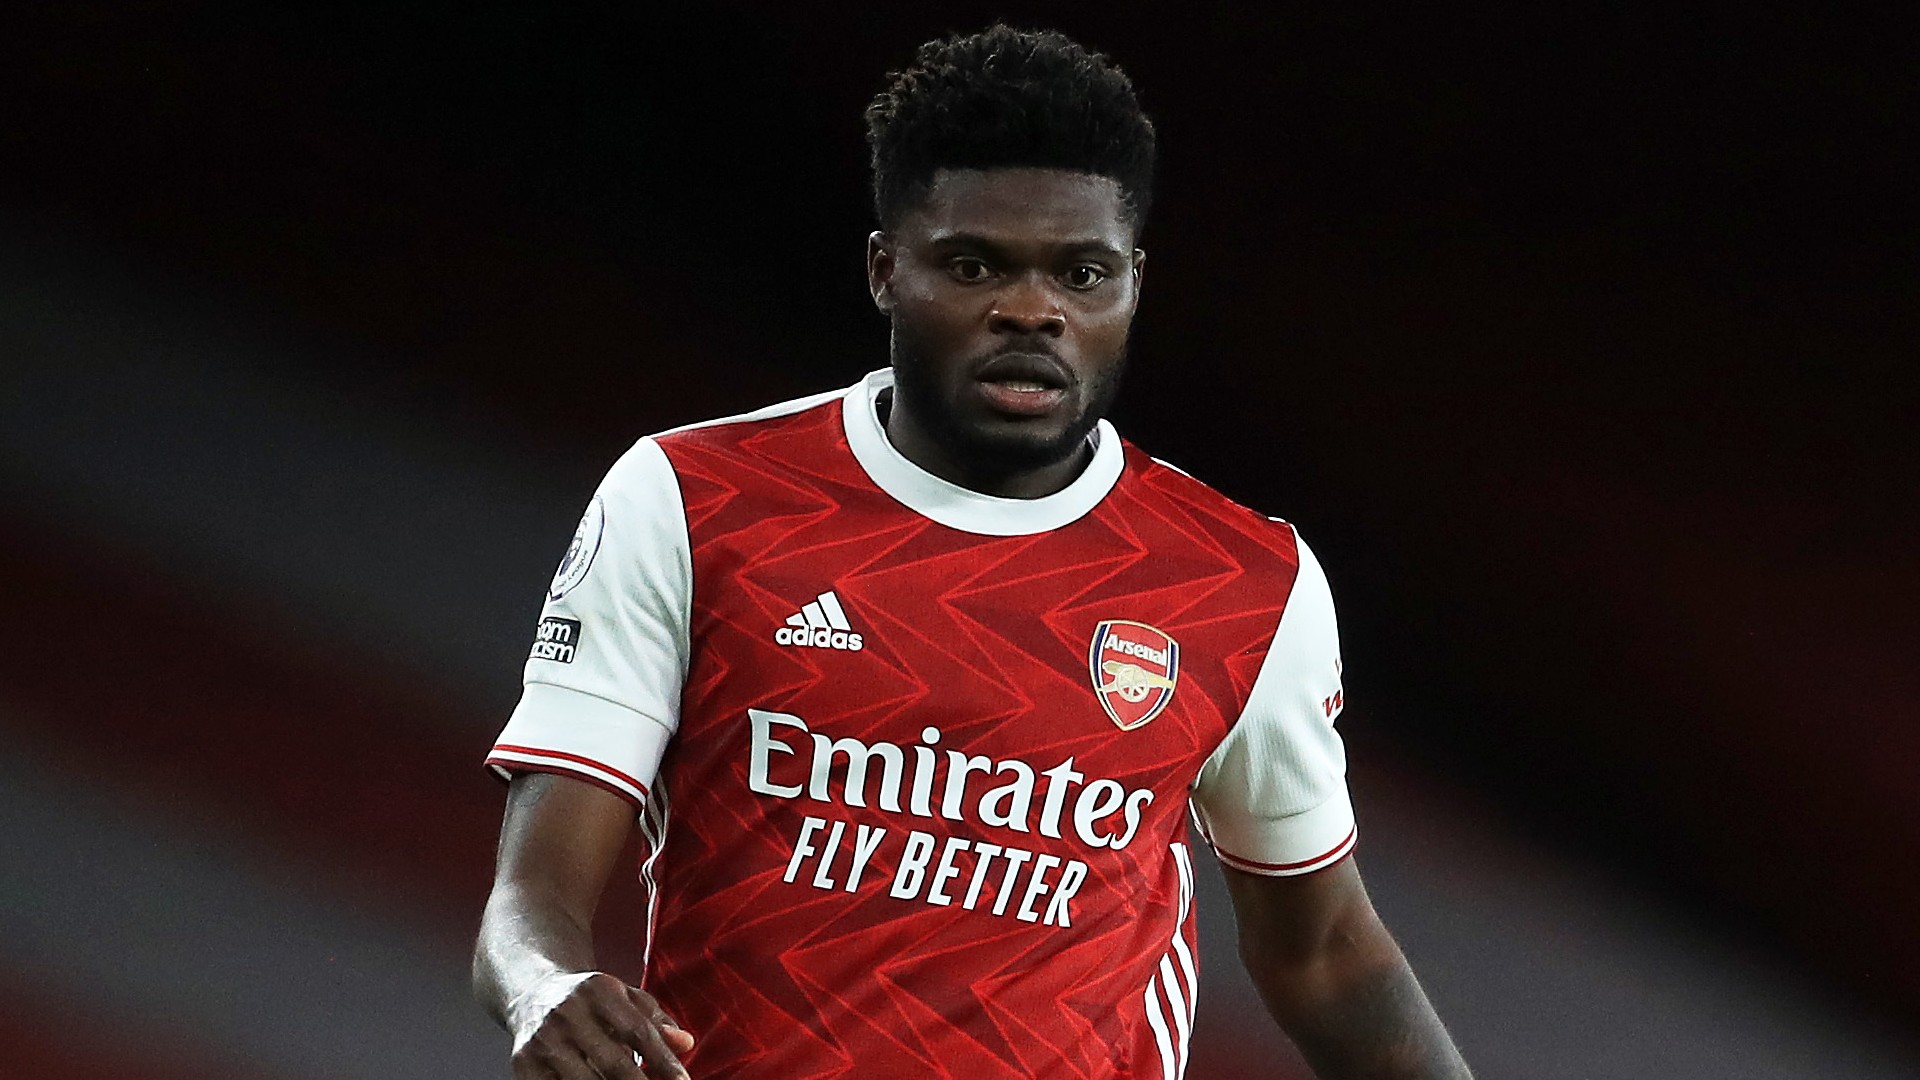 Arsenal midfielder Thomas Partey handed Black Stars call-up for Ethiopia and South Africa 2022 World Cup qualifiers despite injury